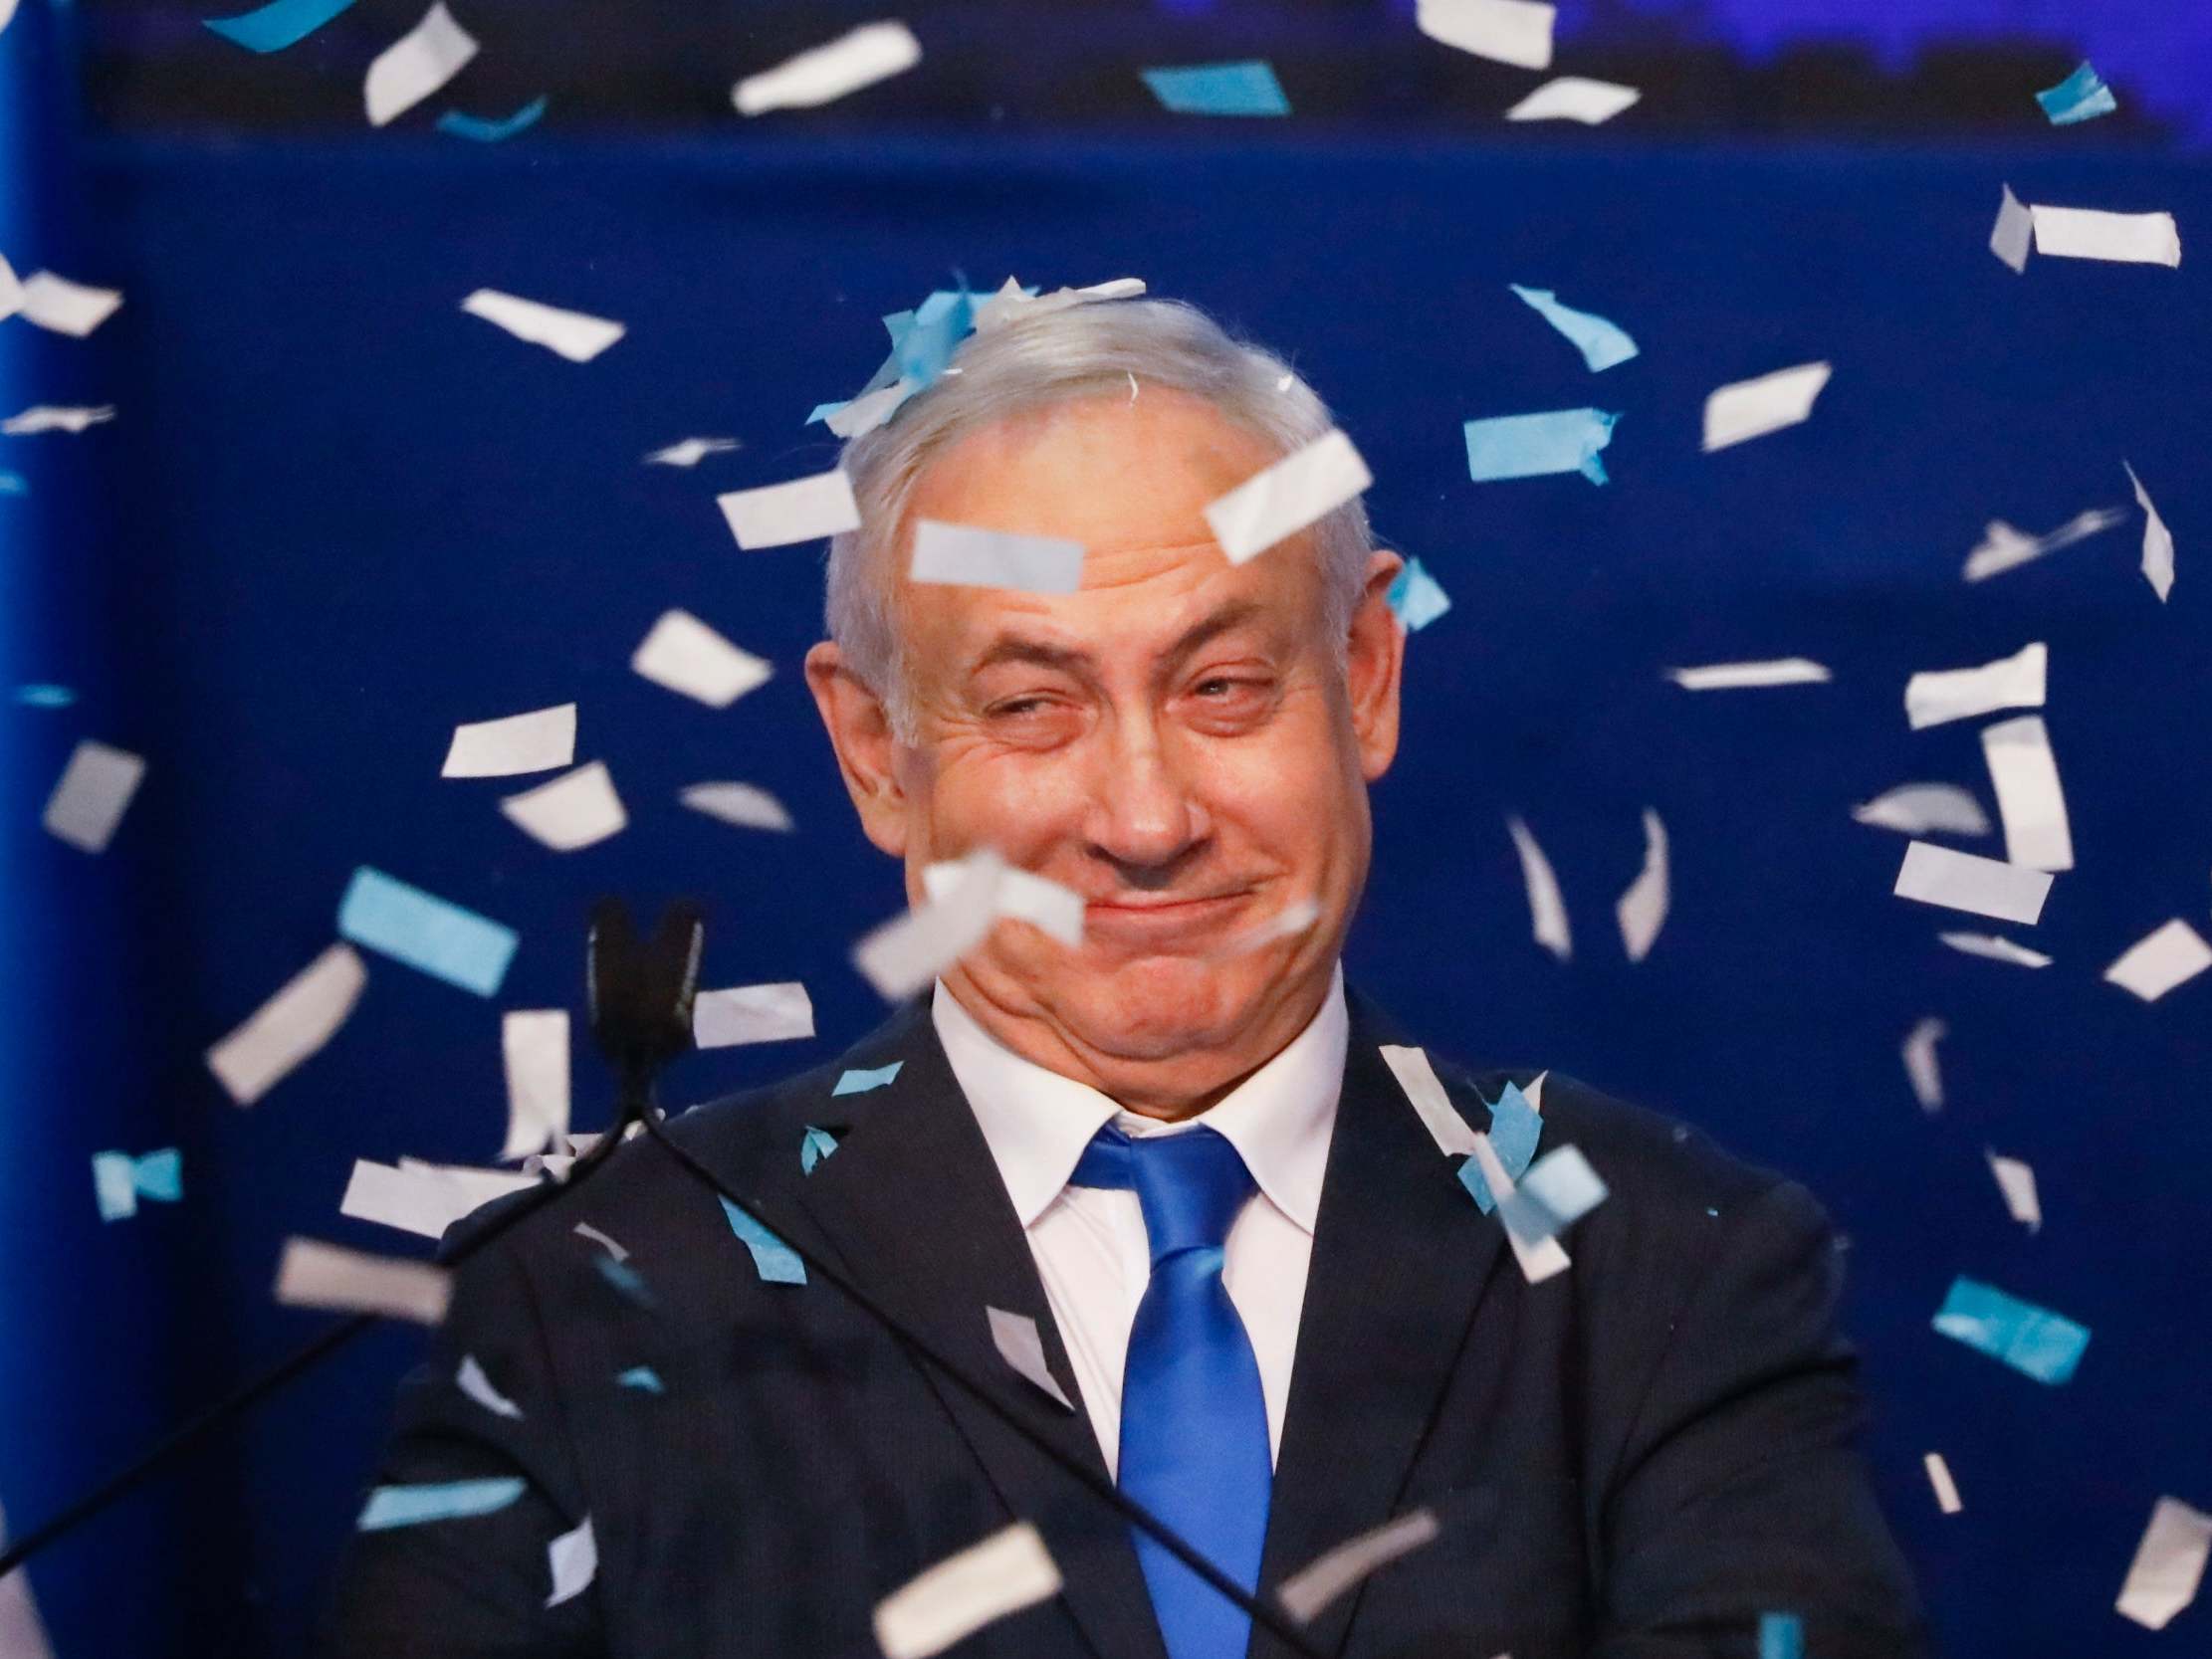 Israeli prime minister Benjamin Netanyahu smiles after first exit poll results on Monday